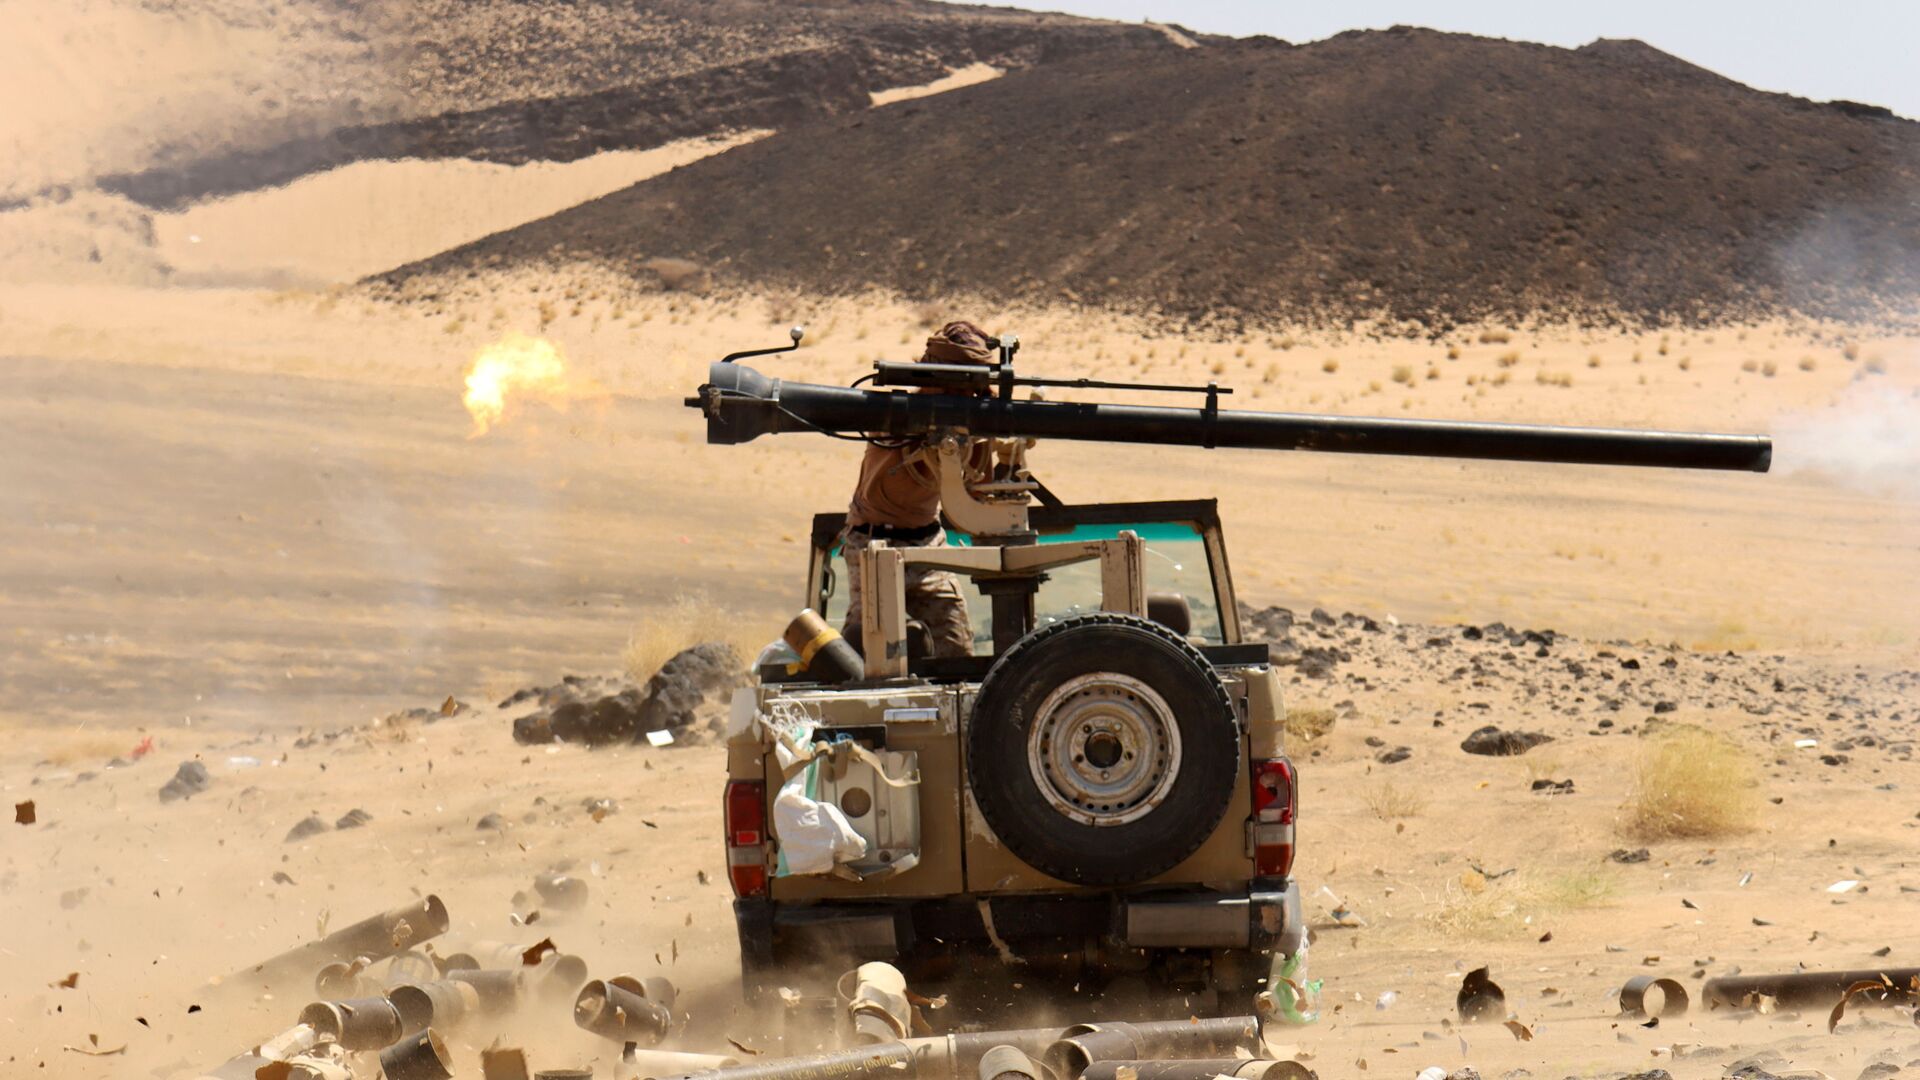 A Yemeni government fighter fires a vehicle-mounted weapon at a frontline position during fighting against Houthi fighters in Marib, Yemen March 9, 2021 - Sputnik International, 1920, 03.10.2021